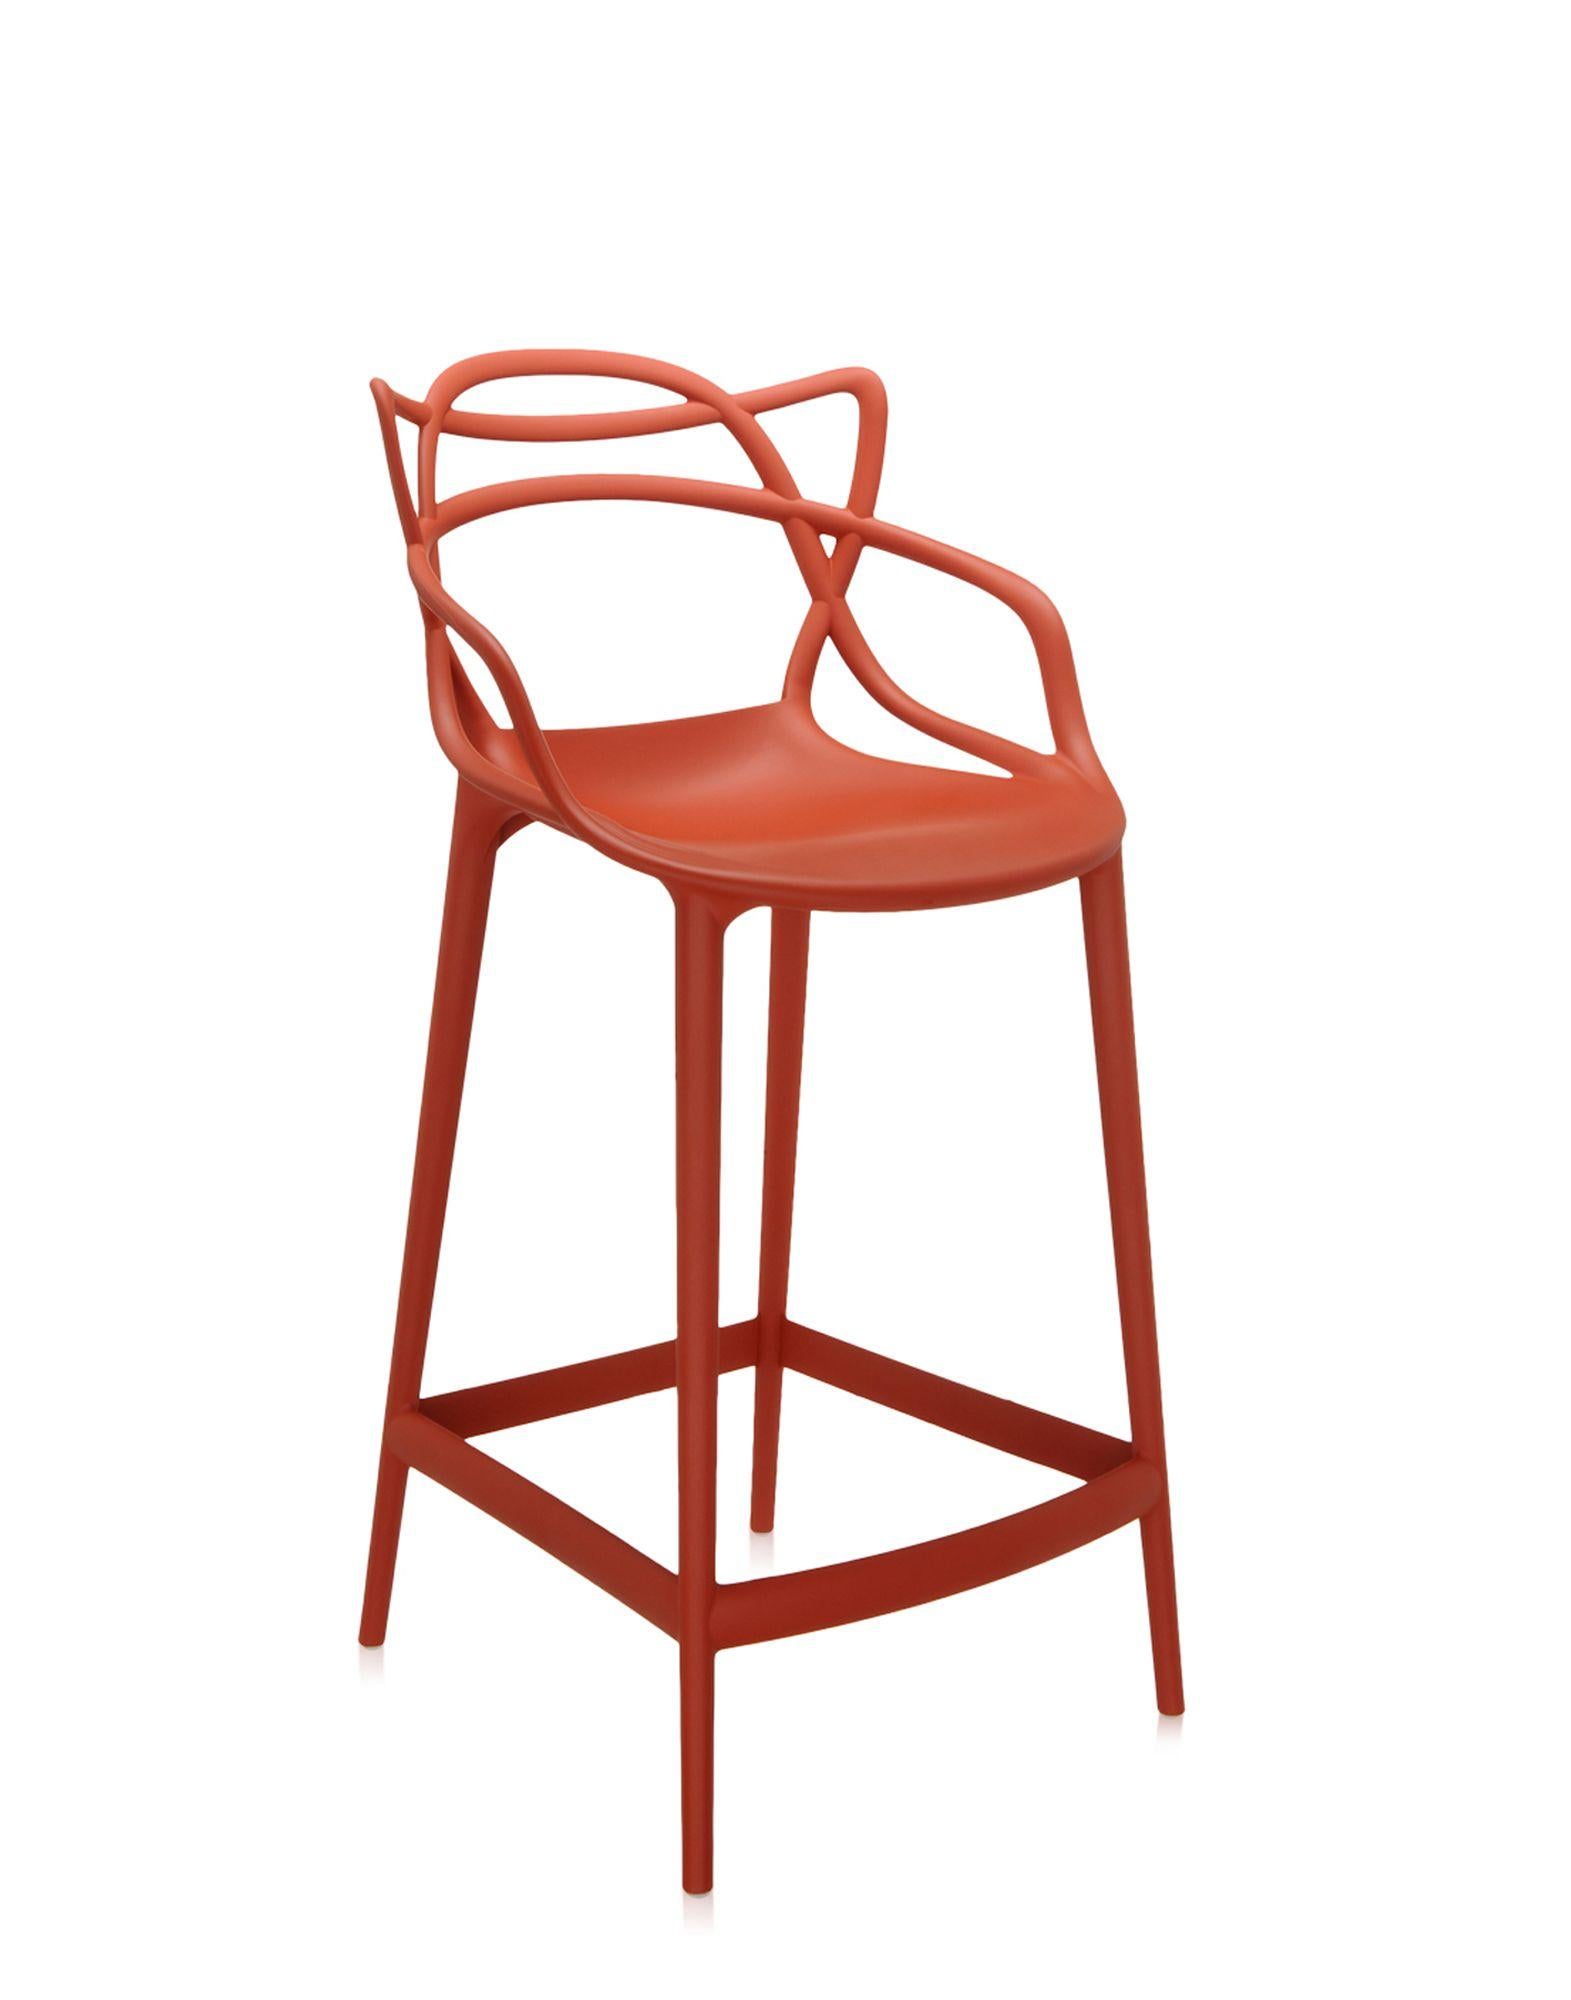 Kartell also offers a stool version of the Masters chair, winner of the Good Design Award 2010 and the Red Dot Award 2013 and a worldwide best seller. The legs are lengthened and the seat is shrunk, but the frame's unmistakable graphic look, created